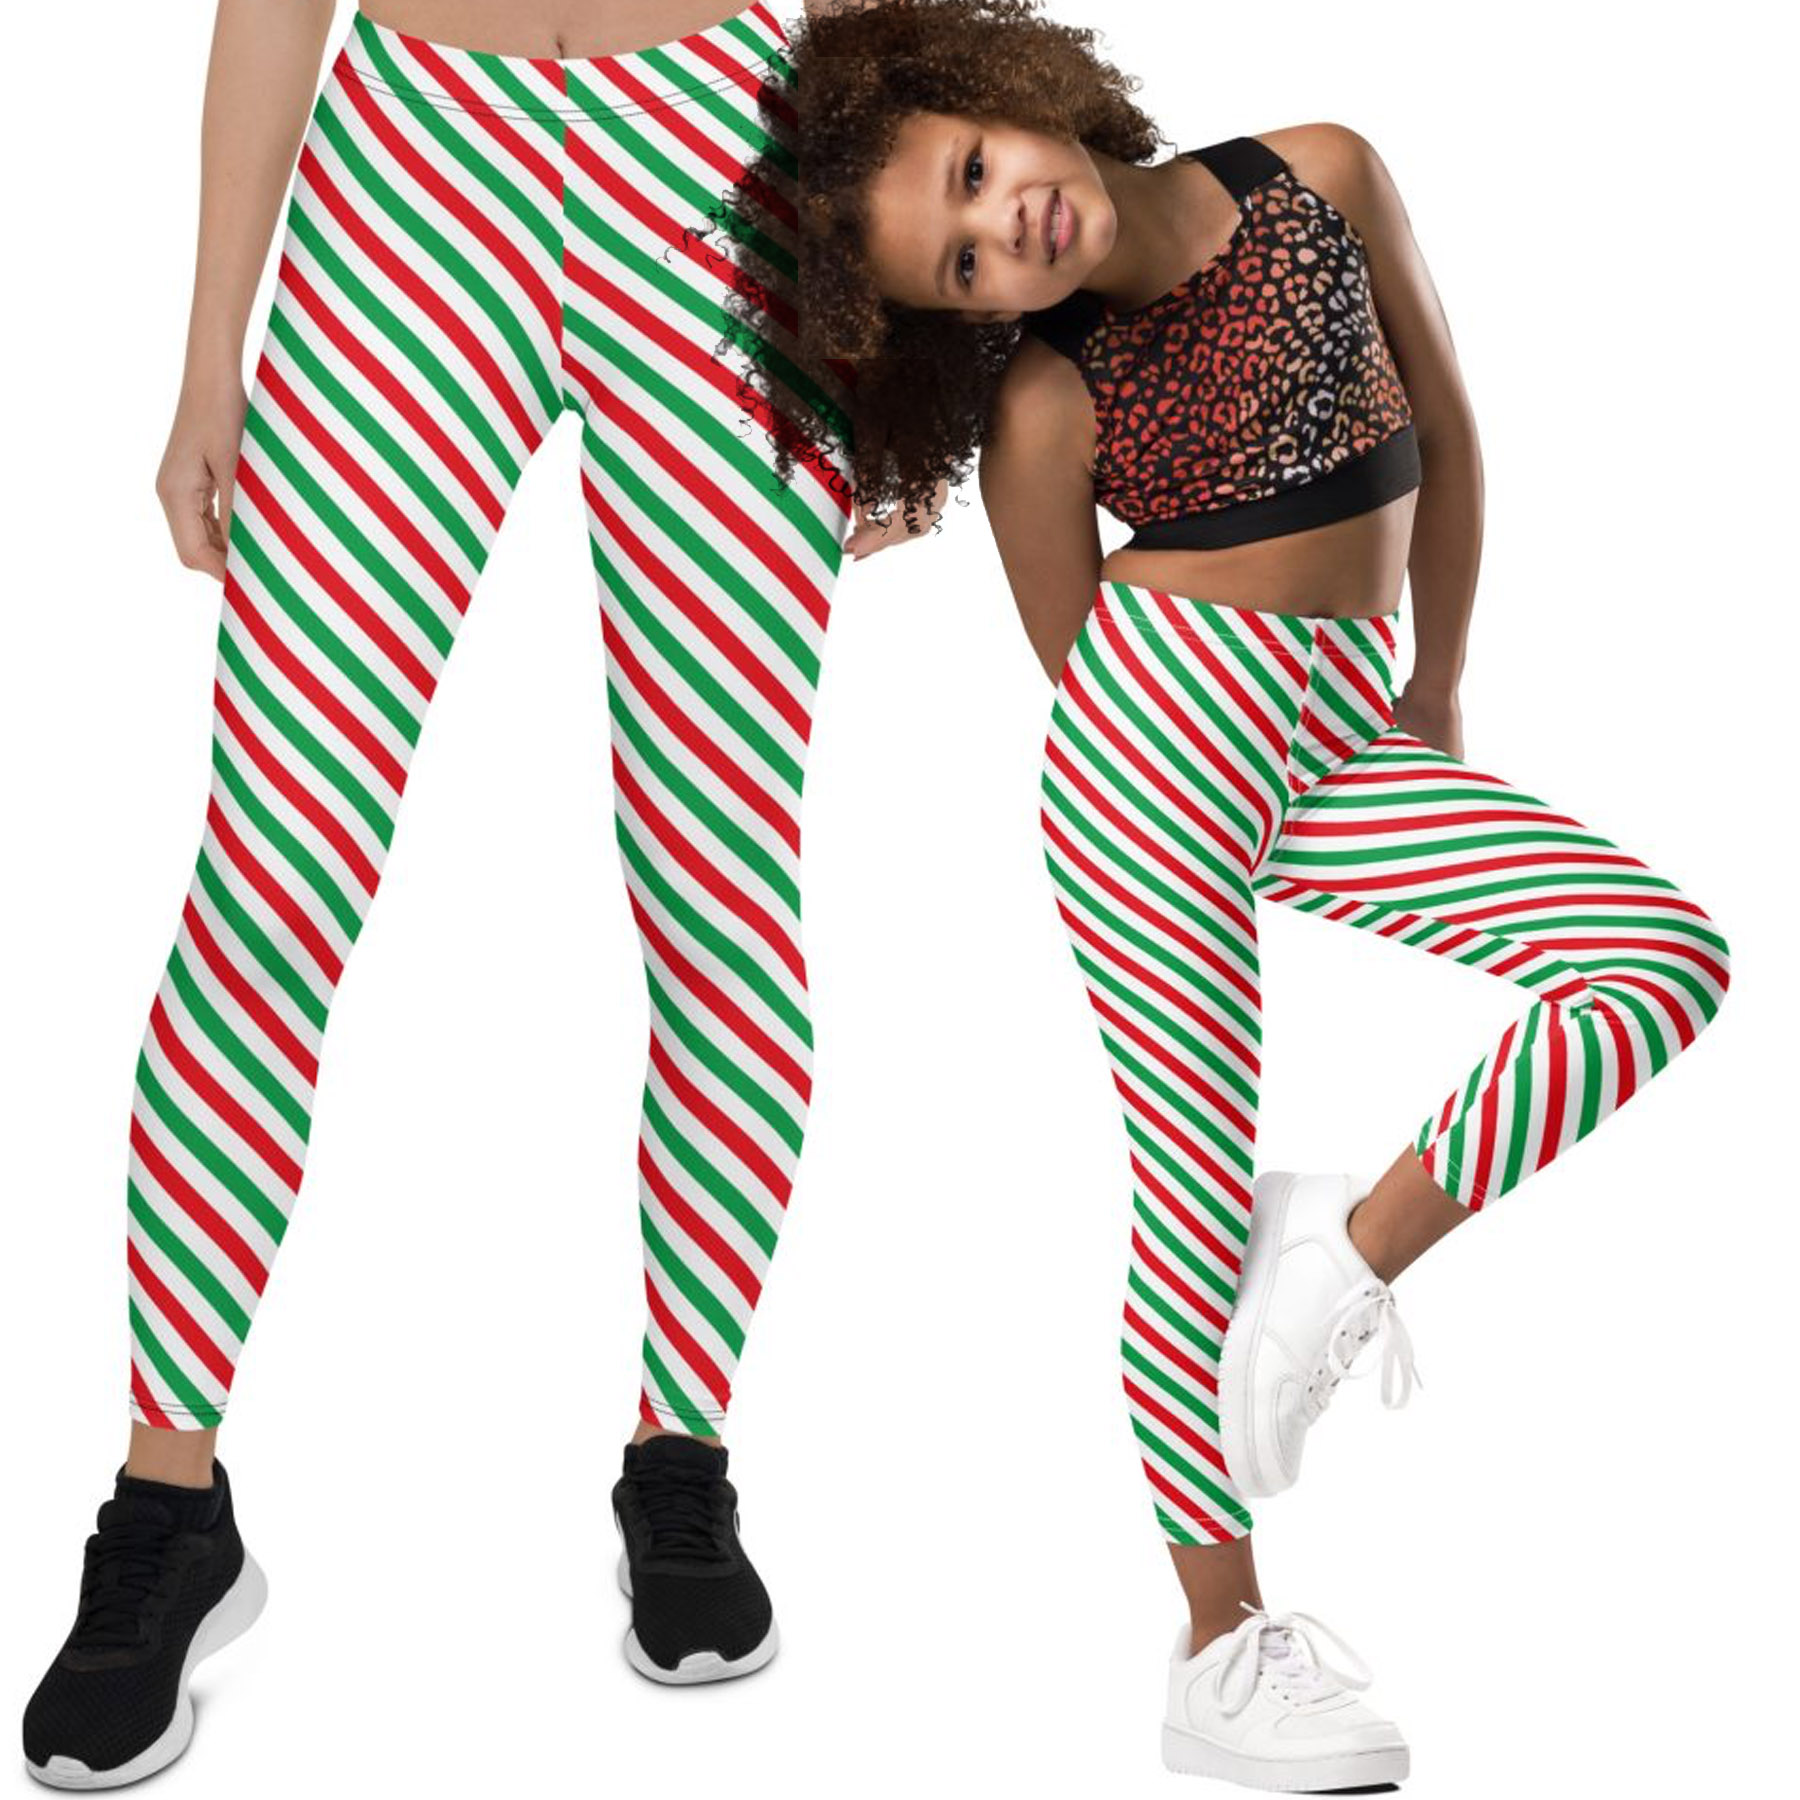 Christmas candy cane striped Leggings for woman and kid - AIW Art Gifts